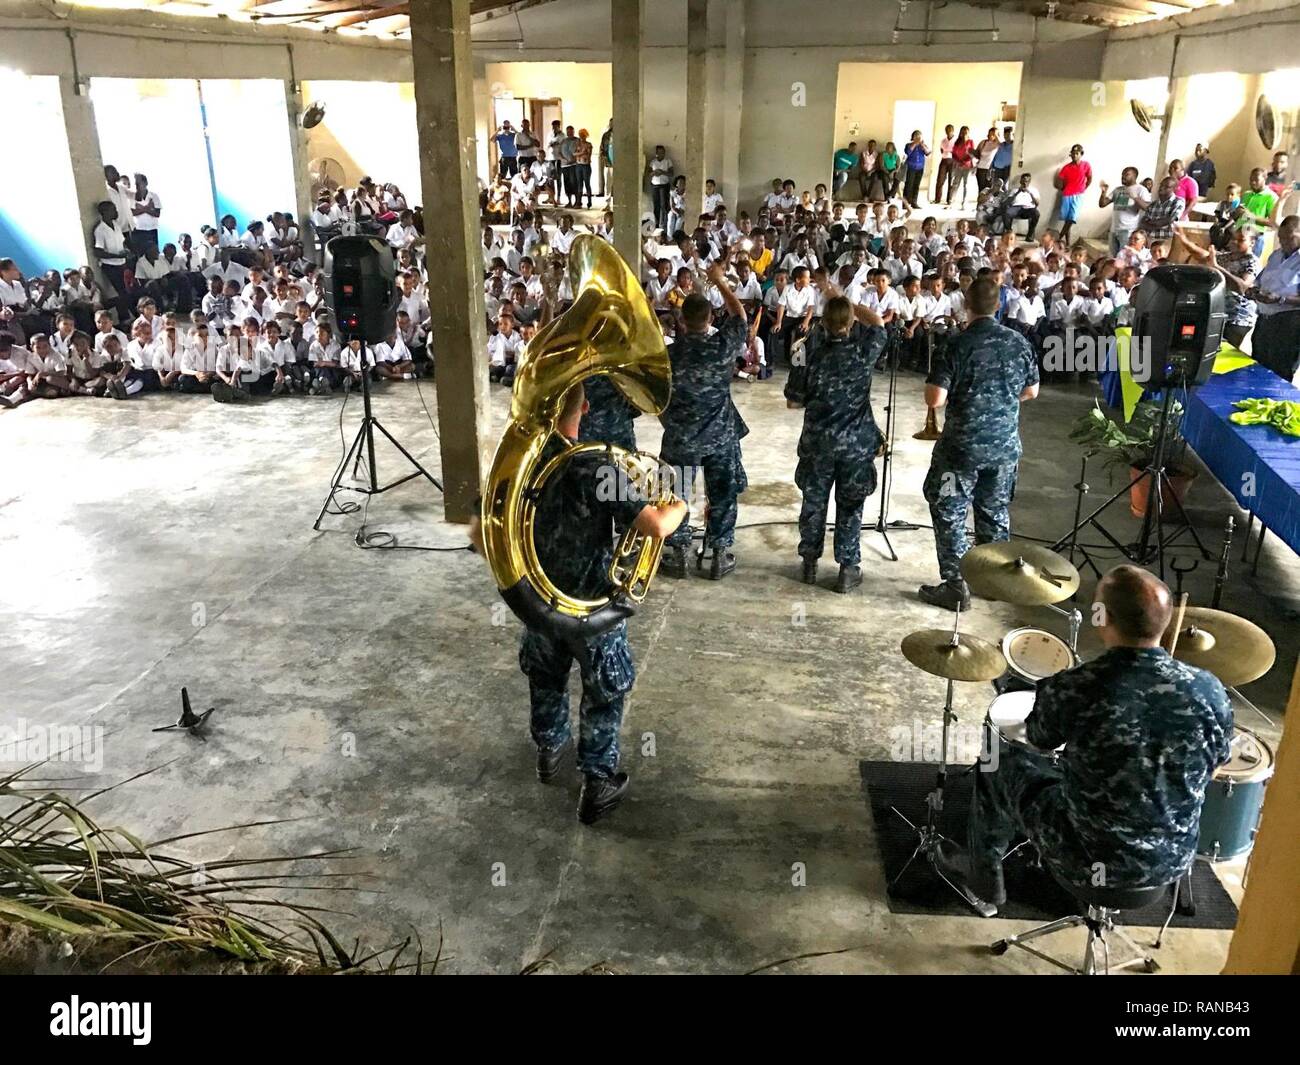 SANTA FE, Honduras (Feb. 22, 2017) Members of the U.S. Fleet Forces FF) Band perform for host nation school children in support of Continuing Promise 2017 (CP-17) in Sante Fe, Honduras. CP-17 is a U.S. Southern Command-sponsored and U.S. Naval Forces Southern Command/U.S. 4th Fleet-conducted deployment to conduct civil-military operations including humanitarian assistance, training engagements, and medical, dental, and veterinary support to Central and South America. Stock Photo